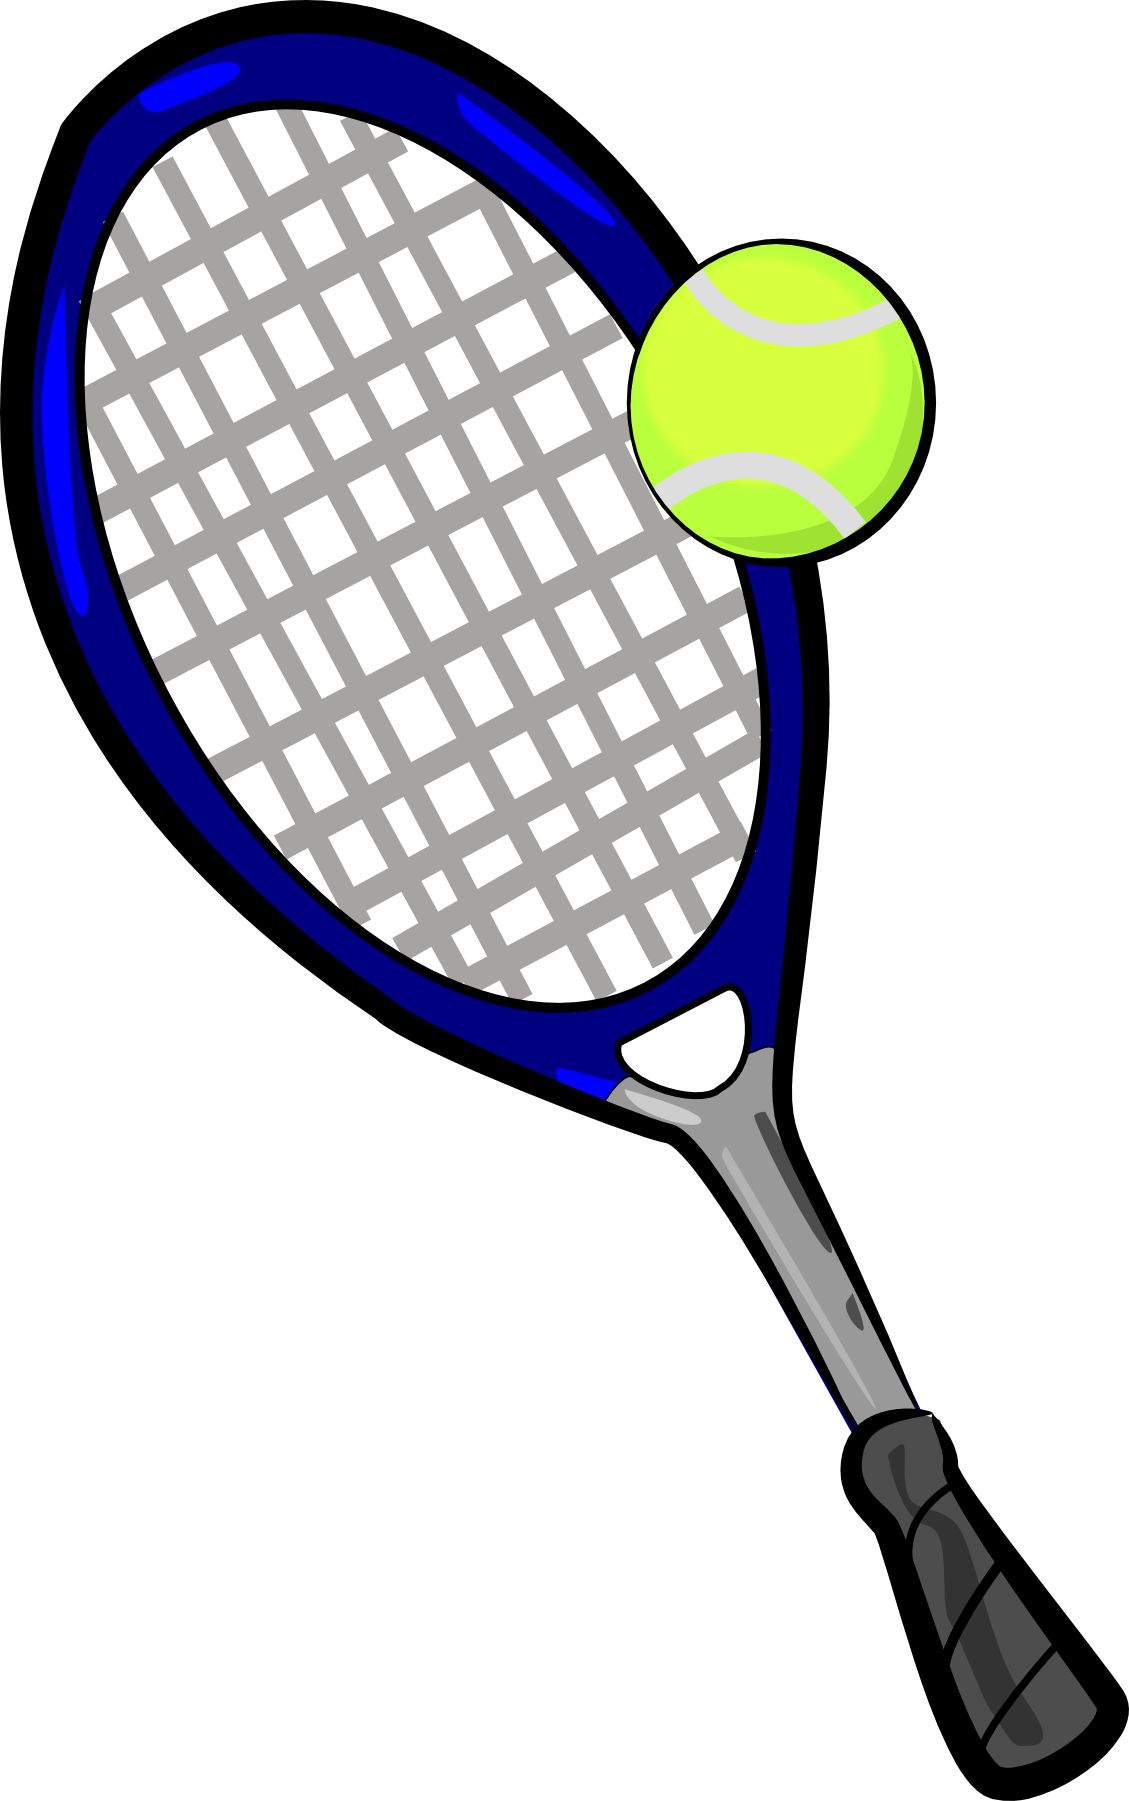 Tennis Ball And Racket Clip Art | Clipart library - Free Clipart Images